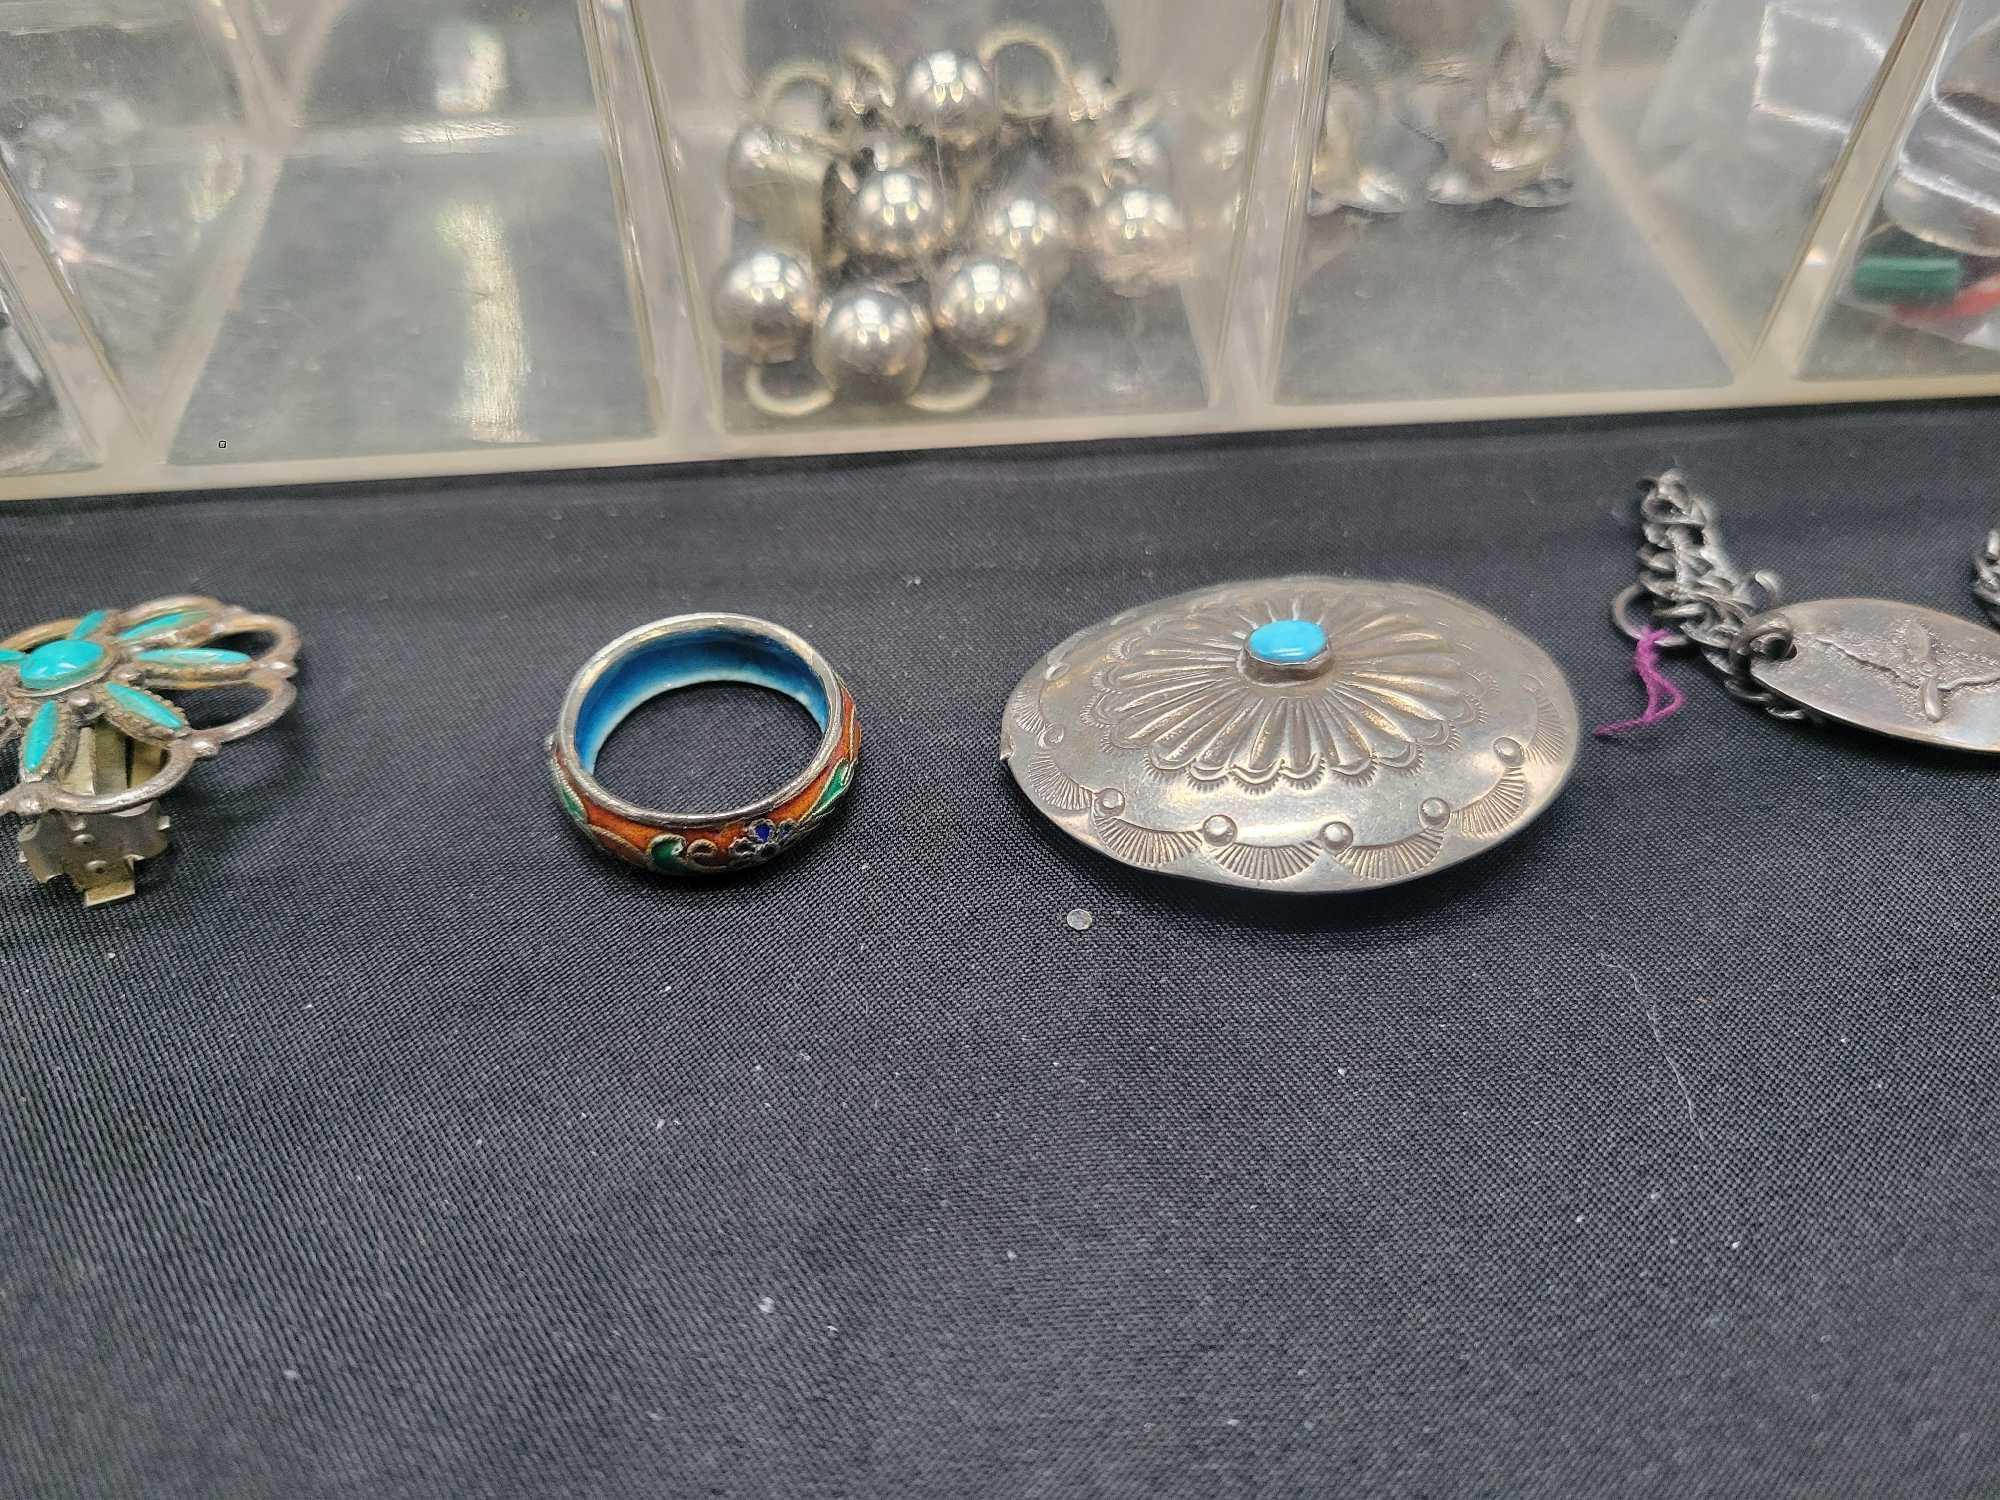 Great lot of sterling jewelry, some turquoise, aviation bracelet, antique pieces